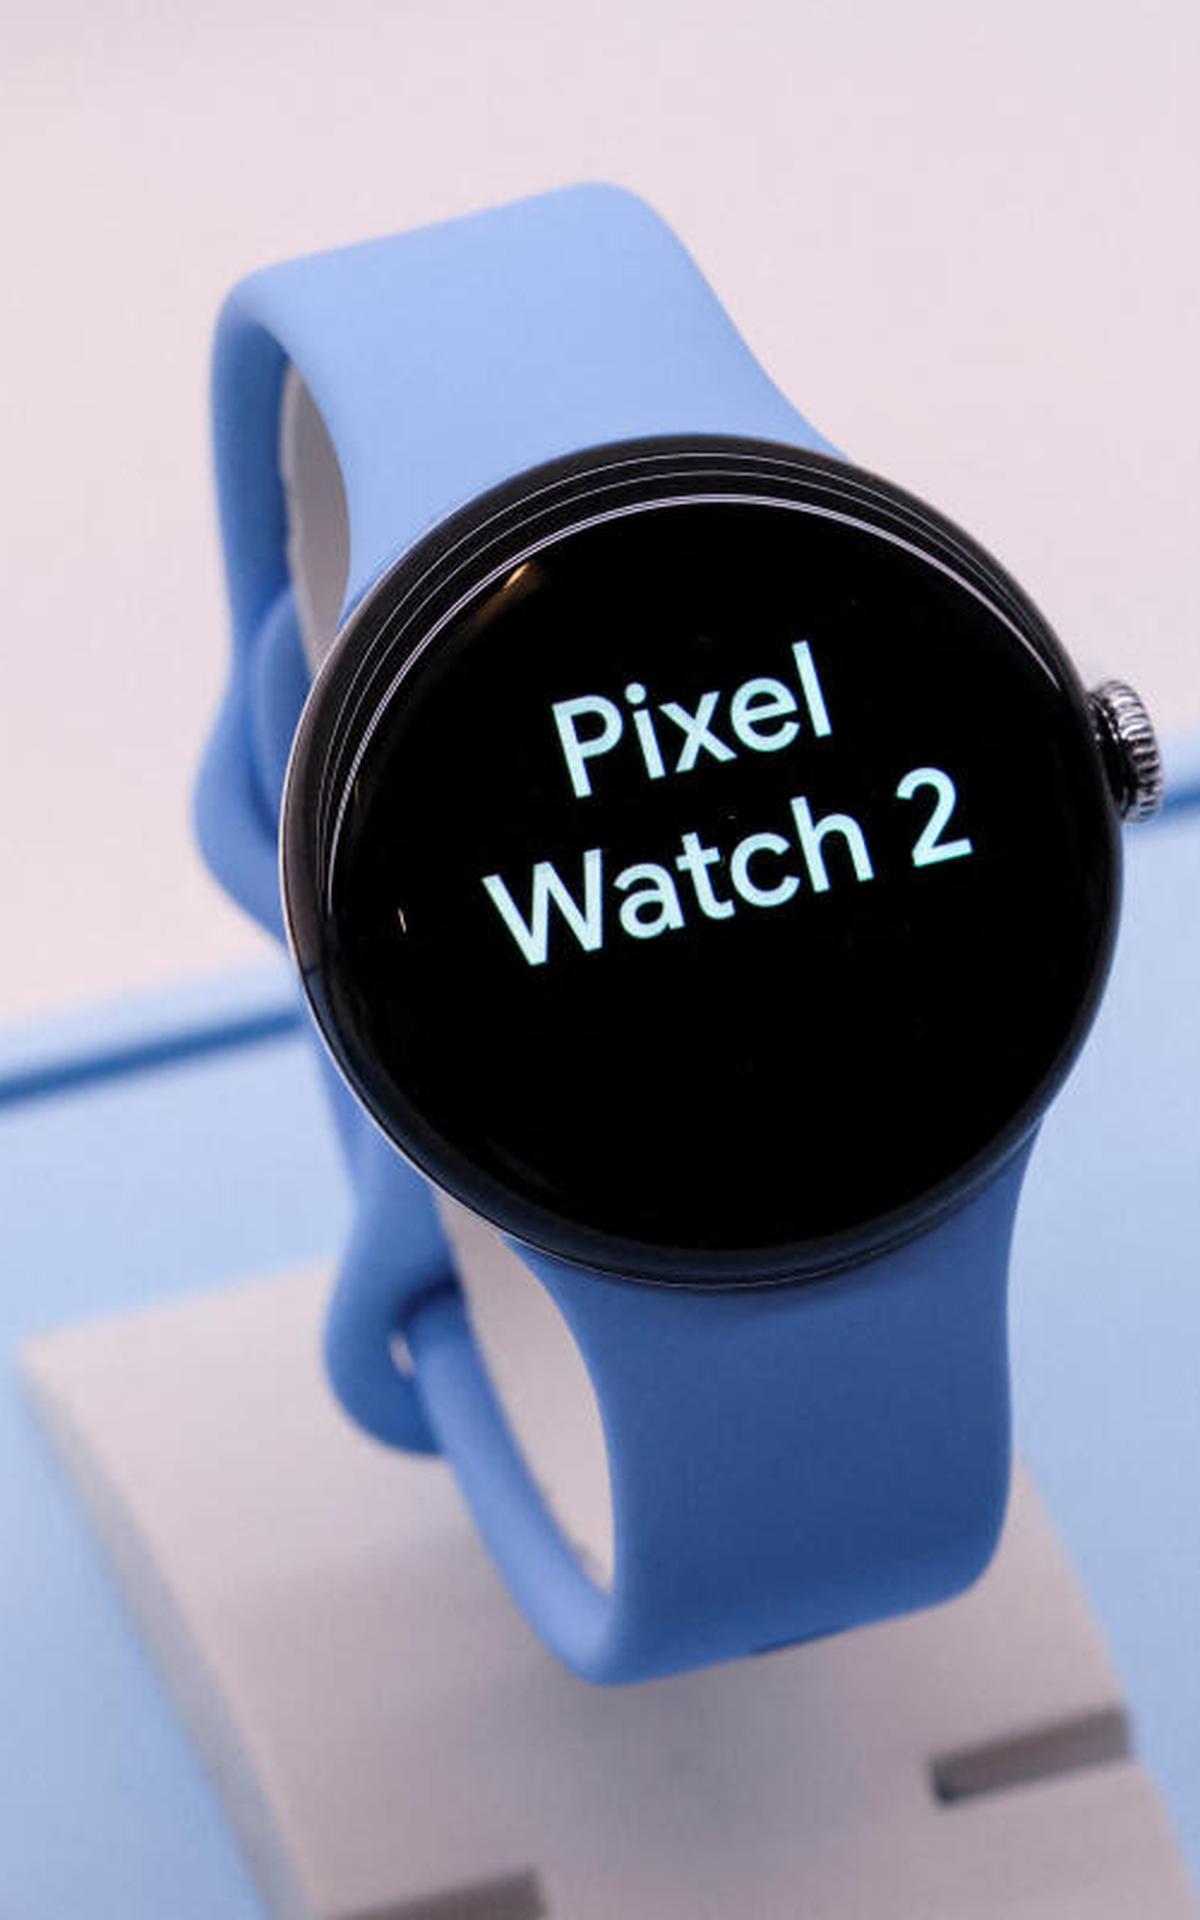 Google Pixel Watch 2 With New Sensors, Longer Battery Life, Wear OS 4.0  Debuts in India: Price, Specifications